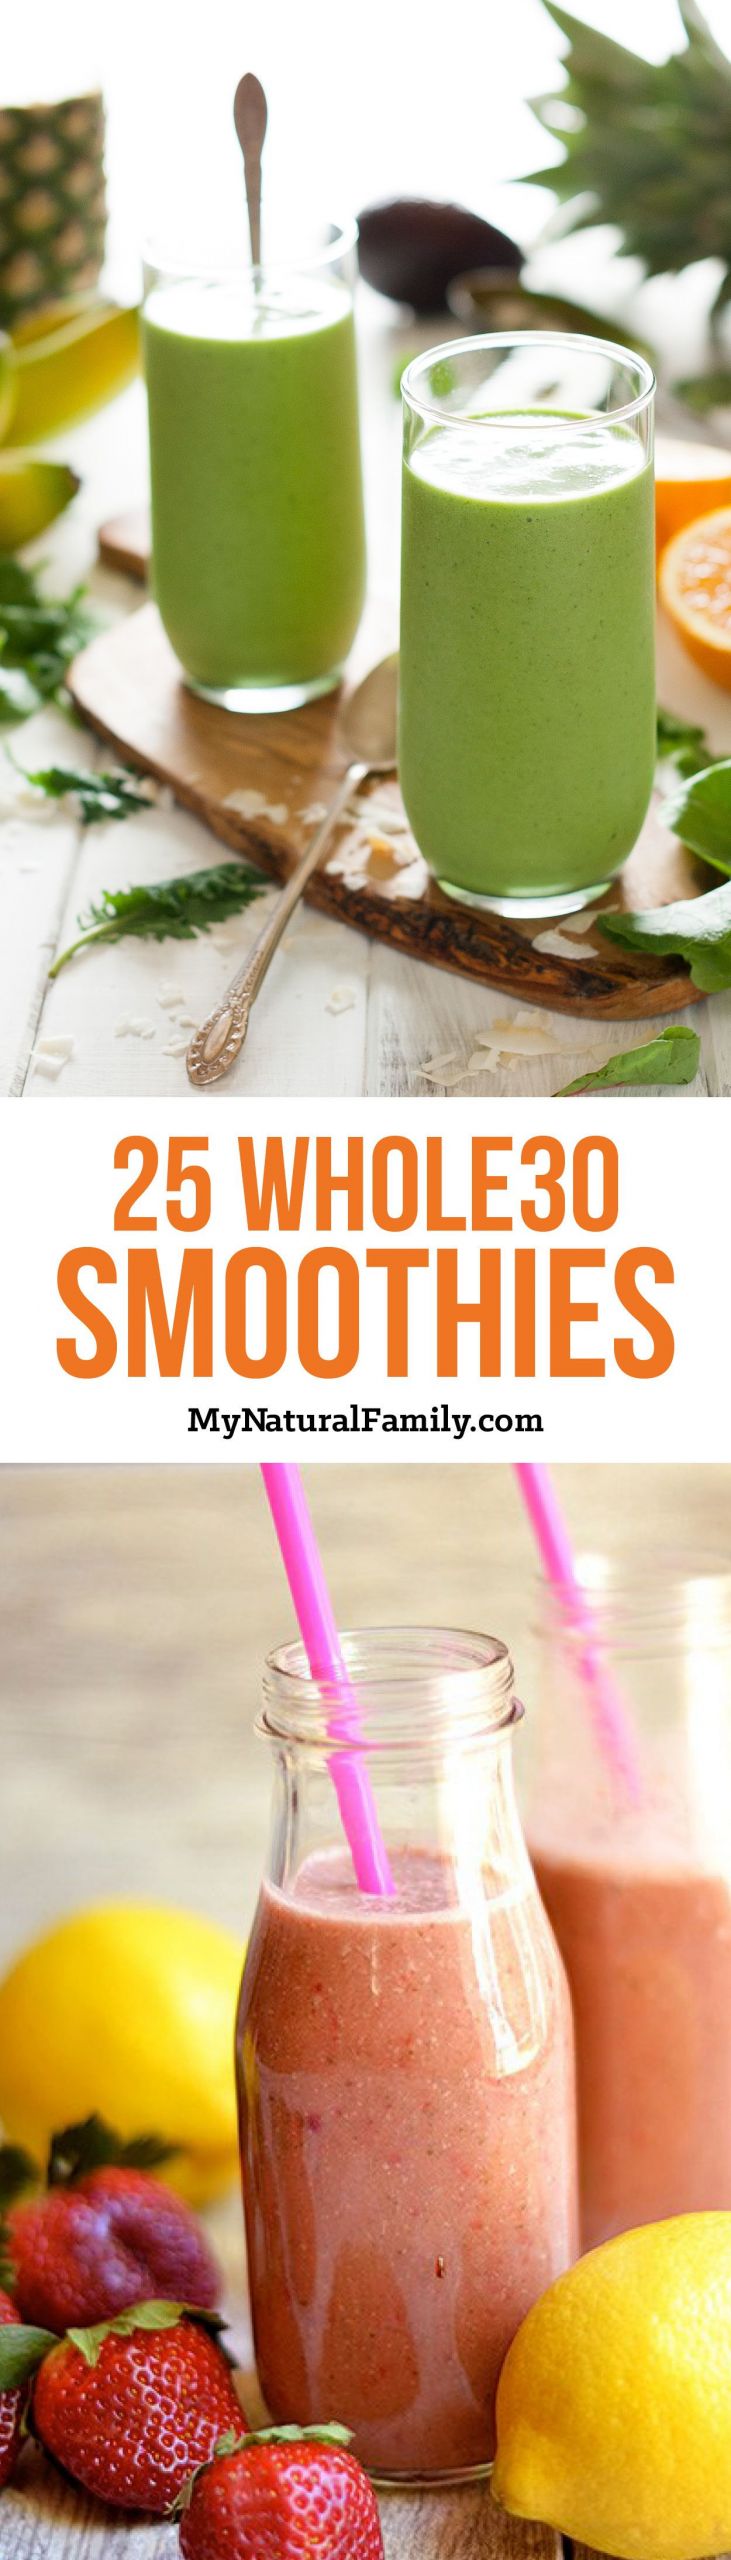 Whole 30 Smoothies
 25 Paleo Breakfast Smoothie Recipes with No Added